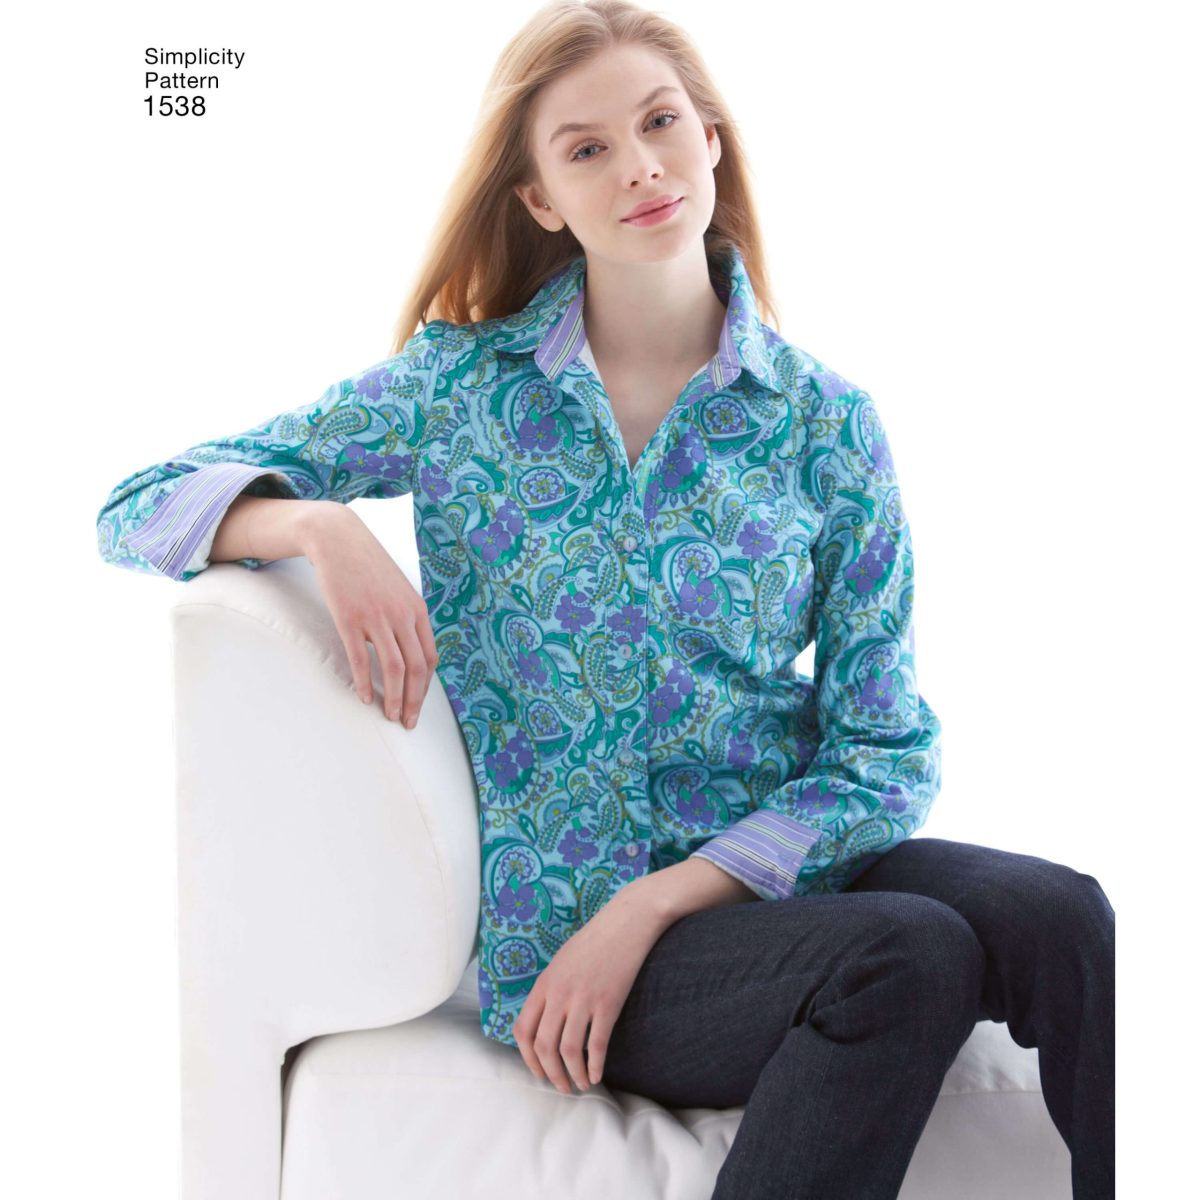 Simplicity Sewing Pattern 1538 Misses' Button Front Shirt sizes 6 - 22